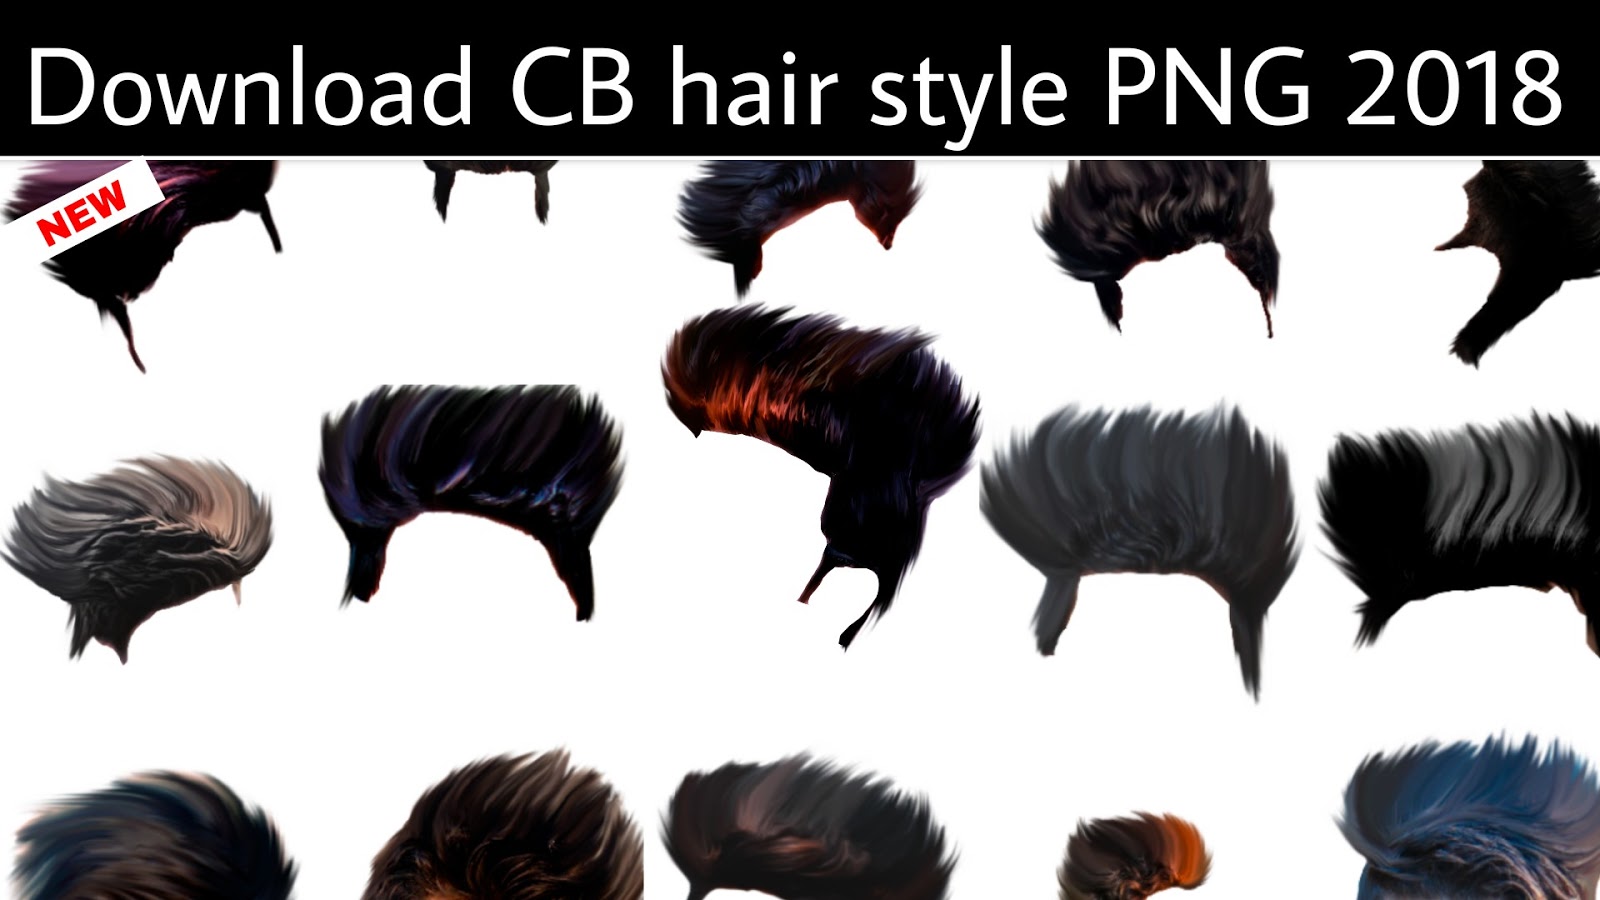 cb hair png download for Picsart | download all cb edit hair style png -  editingpng